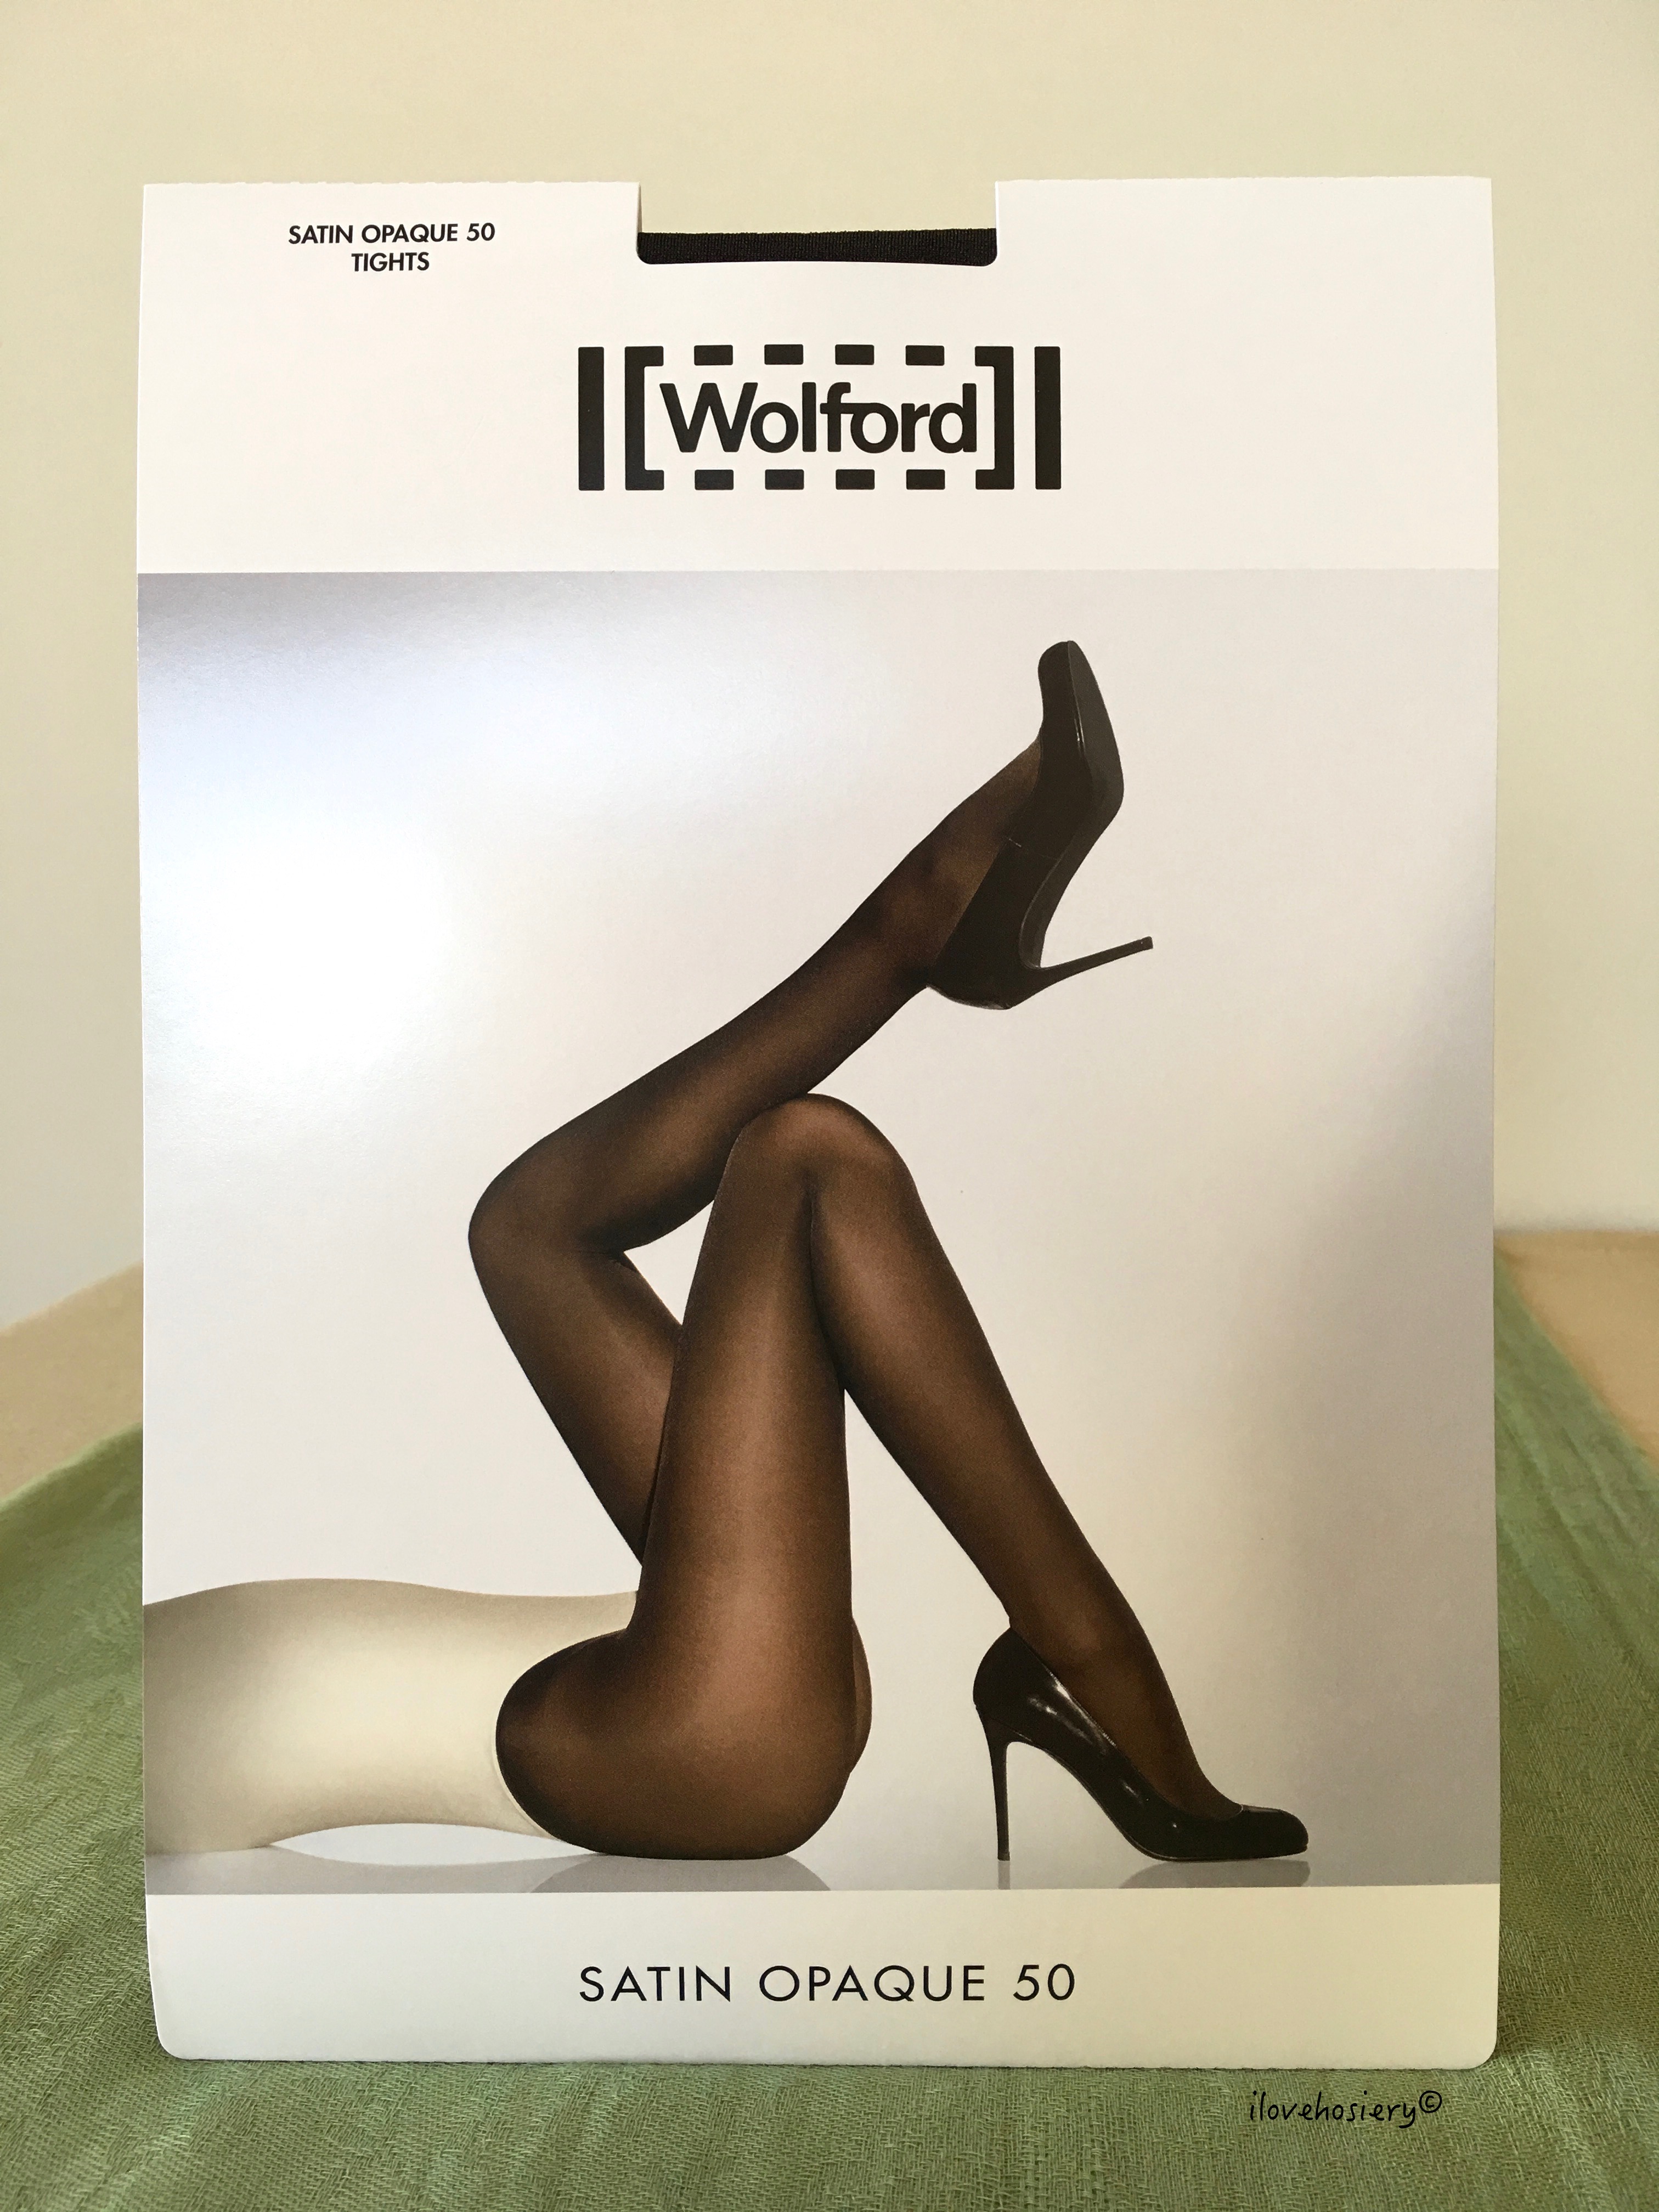 Wolford Satin Opaque 50 Tights - Luxury Tights at Mayfair Stockings